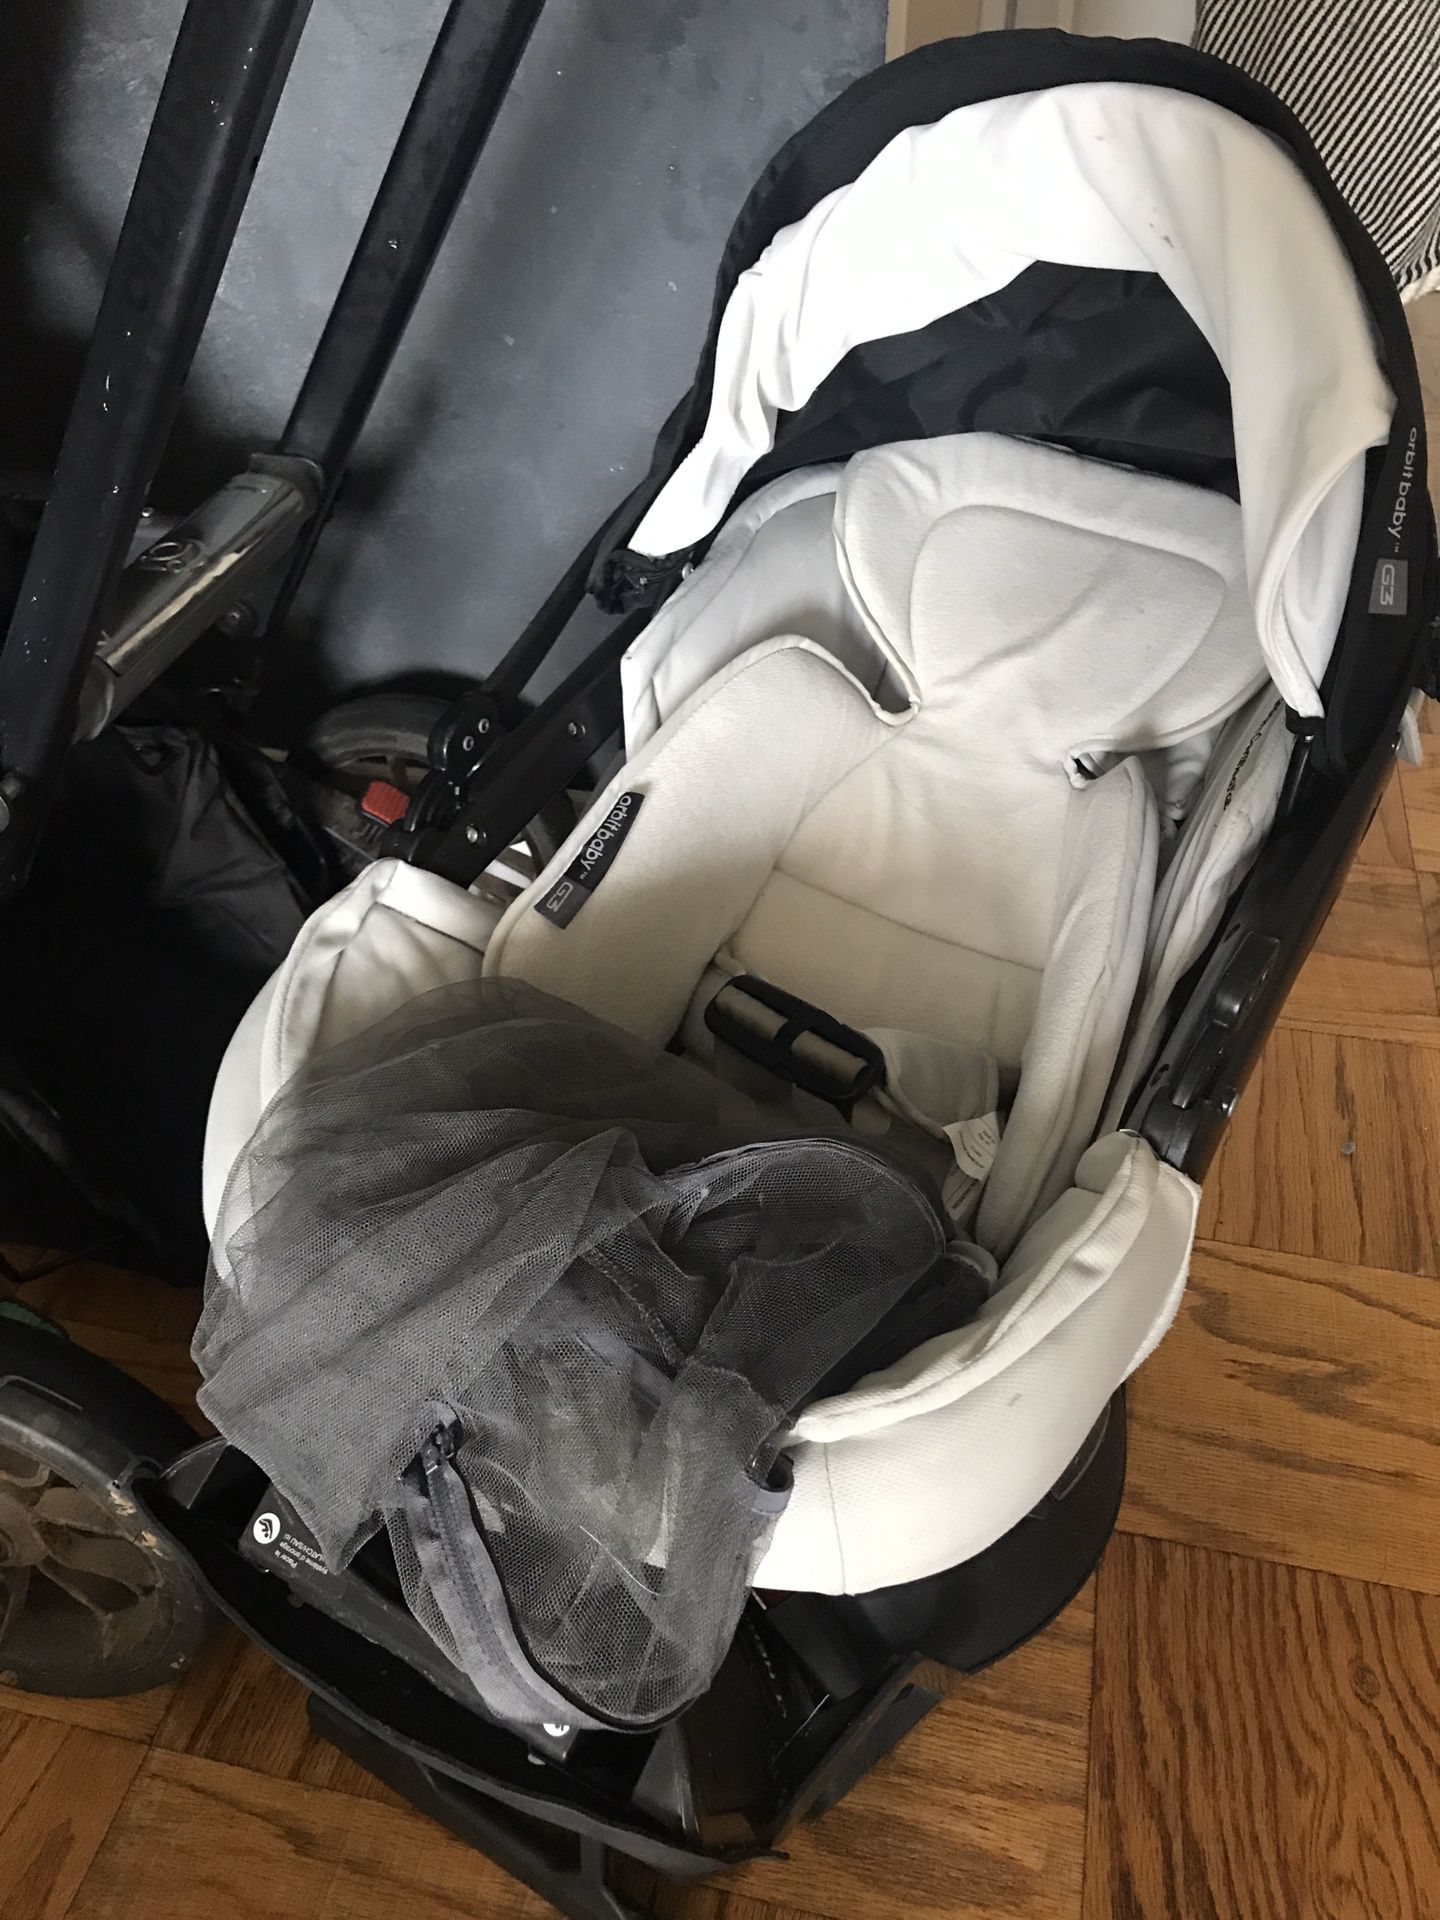 Orbit g3 stroller with car seat and base